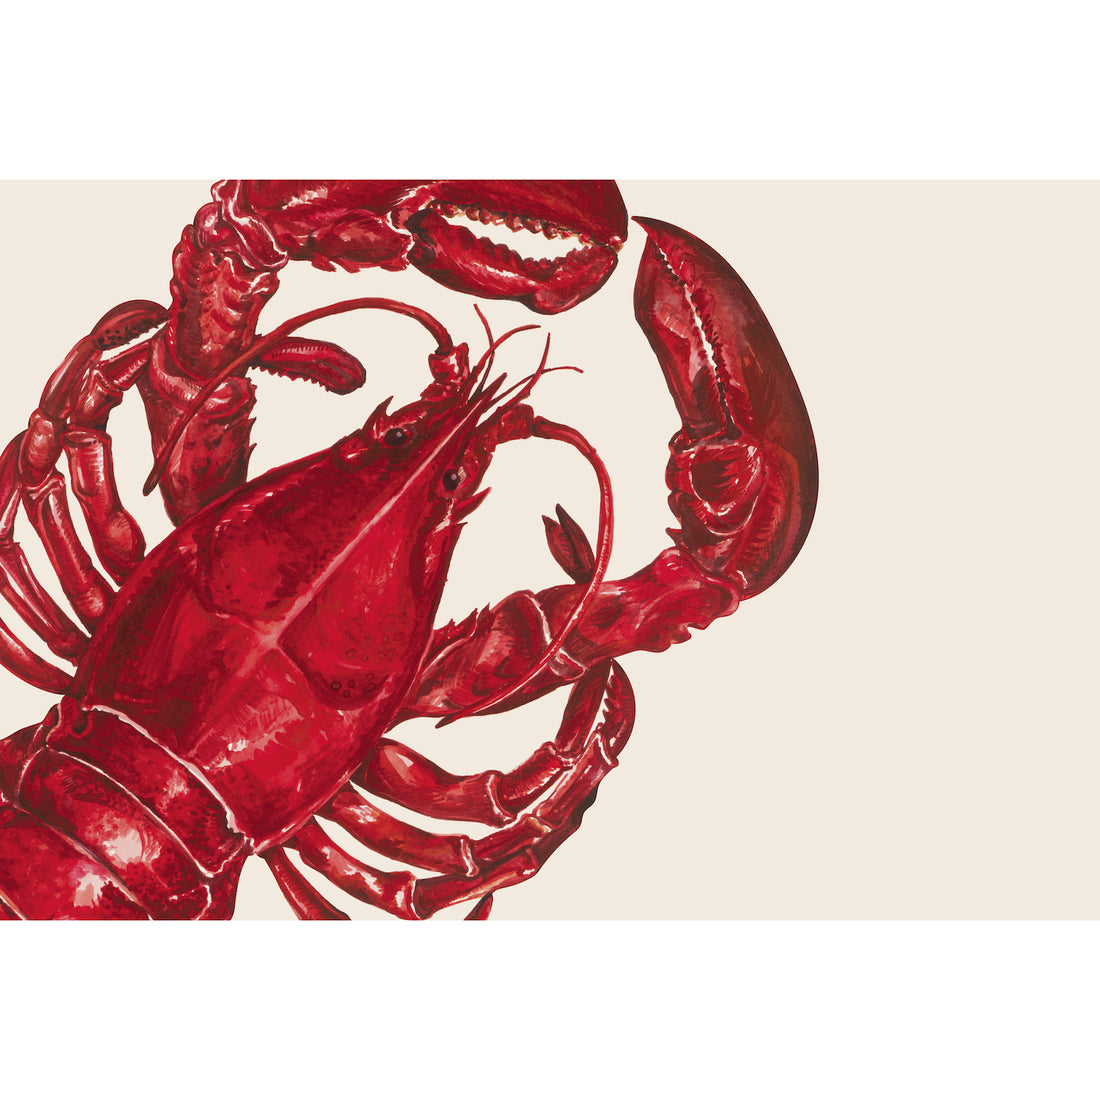 A painted illustration of a large, red lobster&